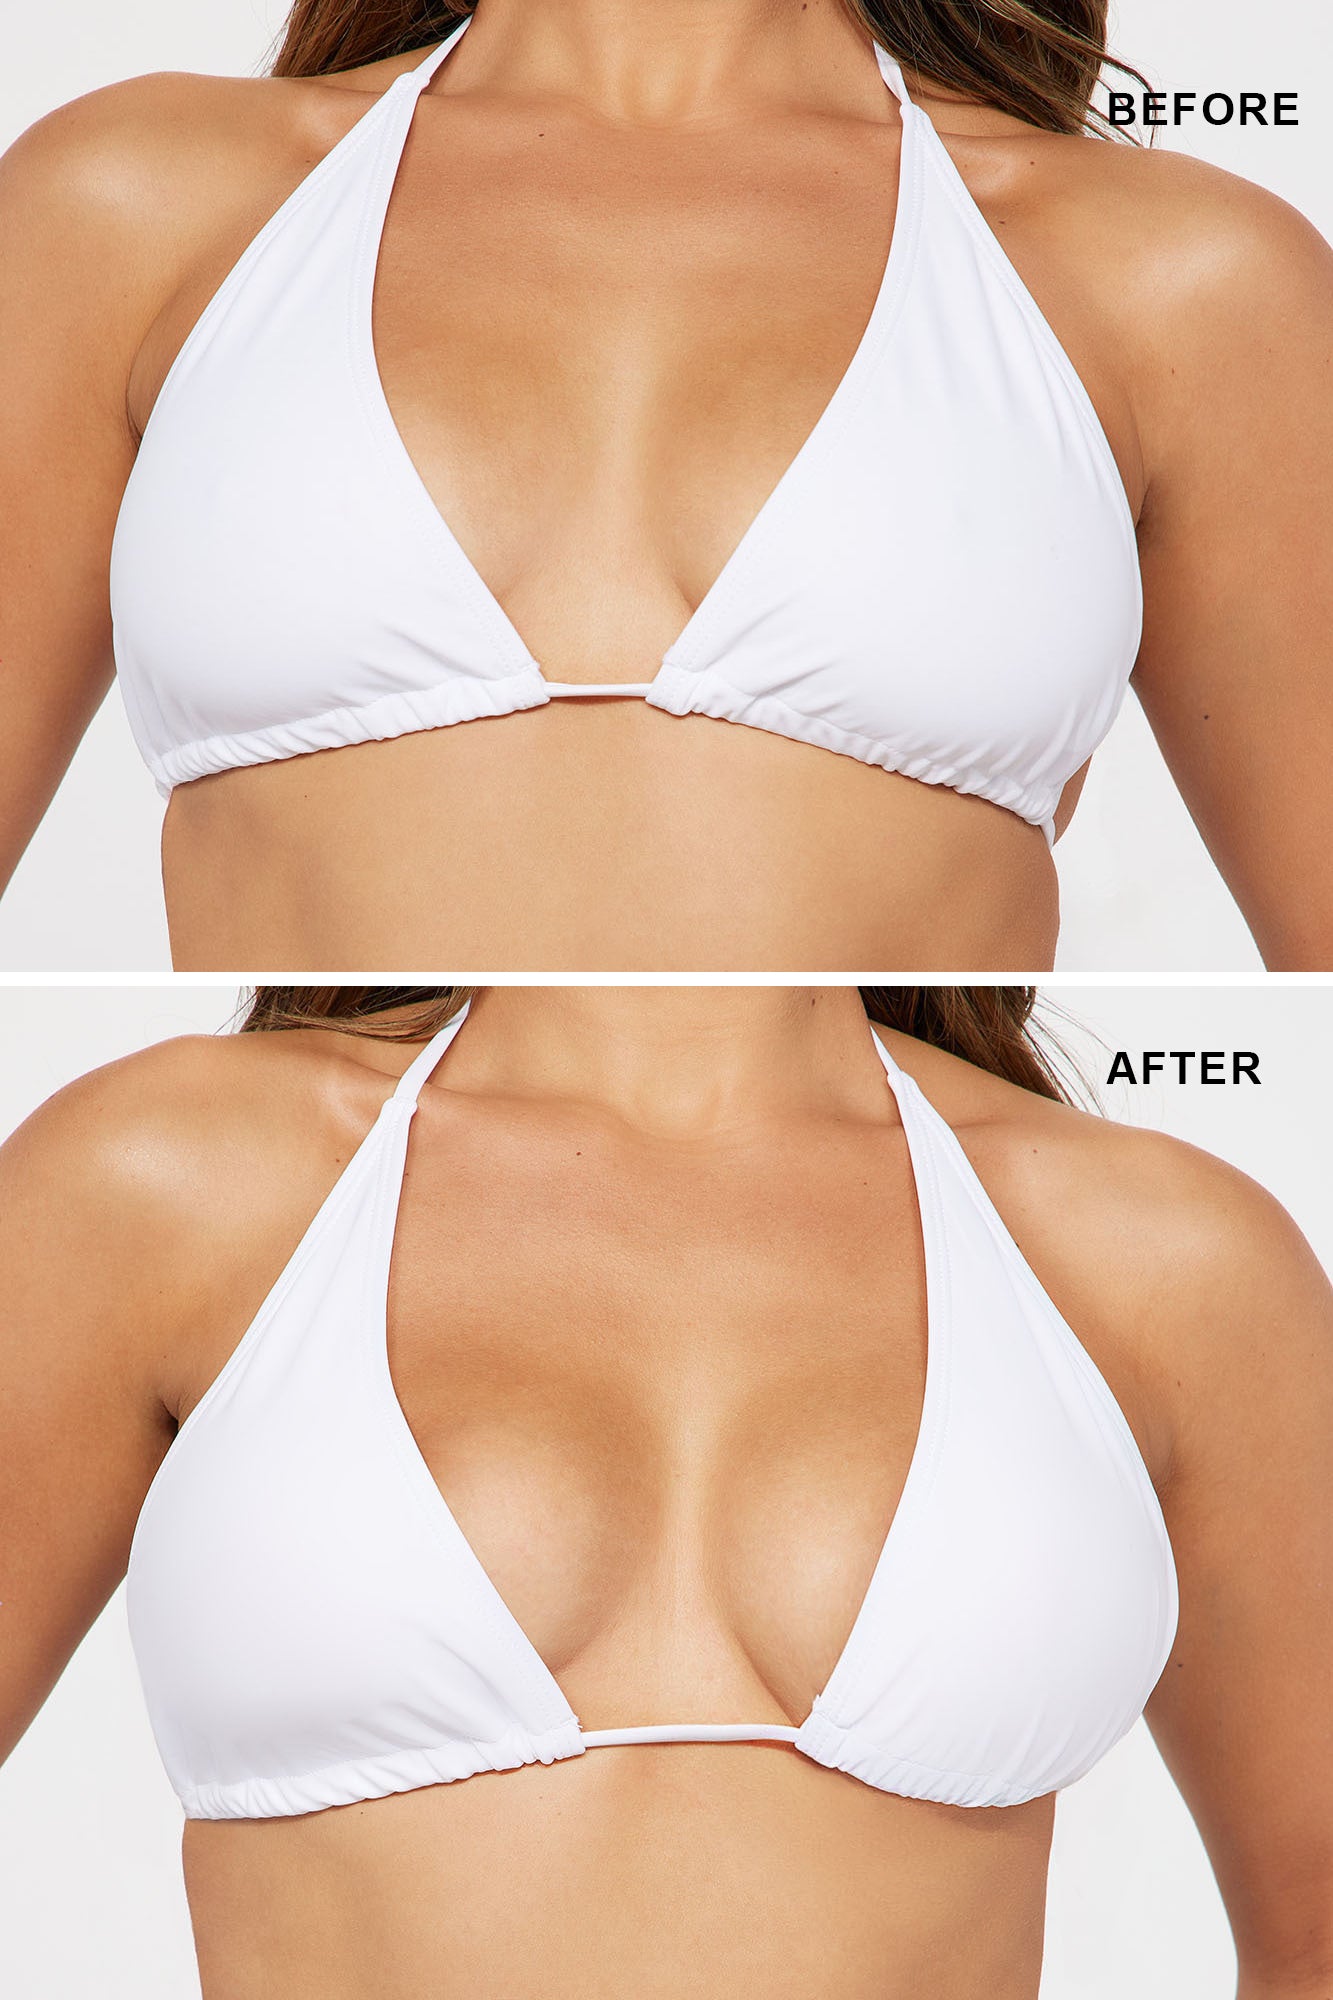 BOOMBA Demi Boost Inserts REVIEW, Sticky Push Up Bra, Before and After